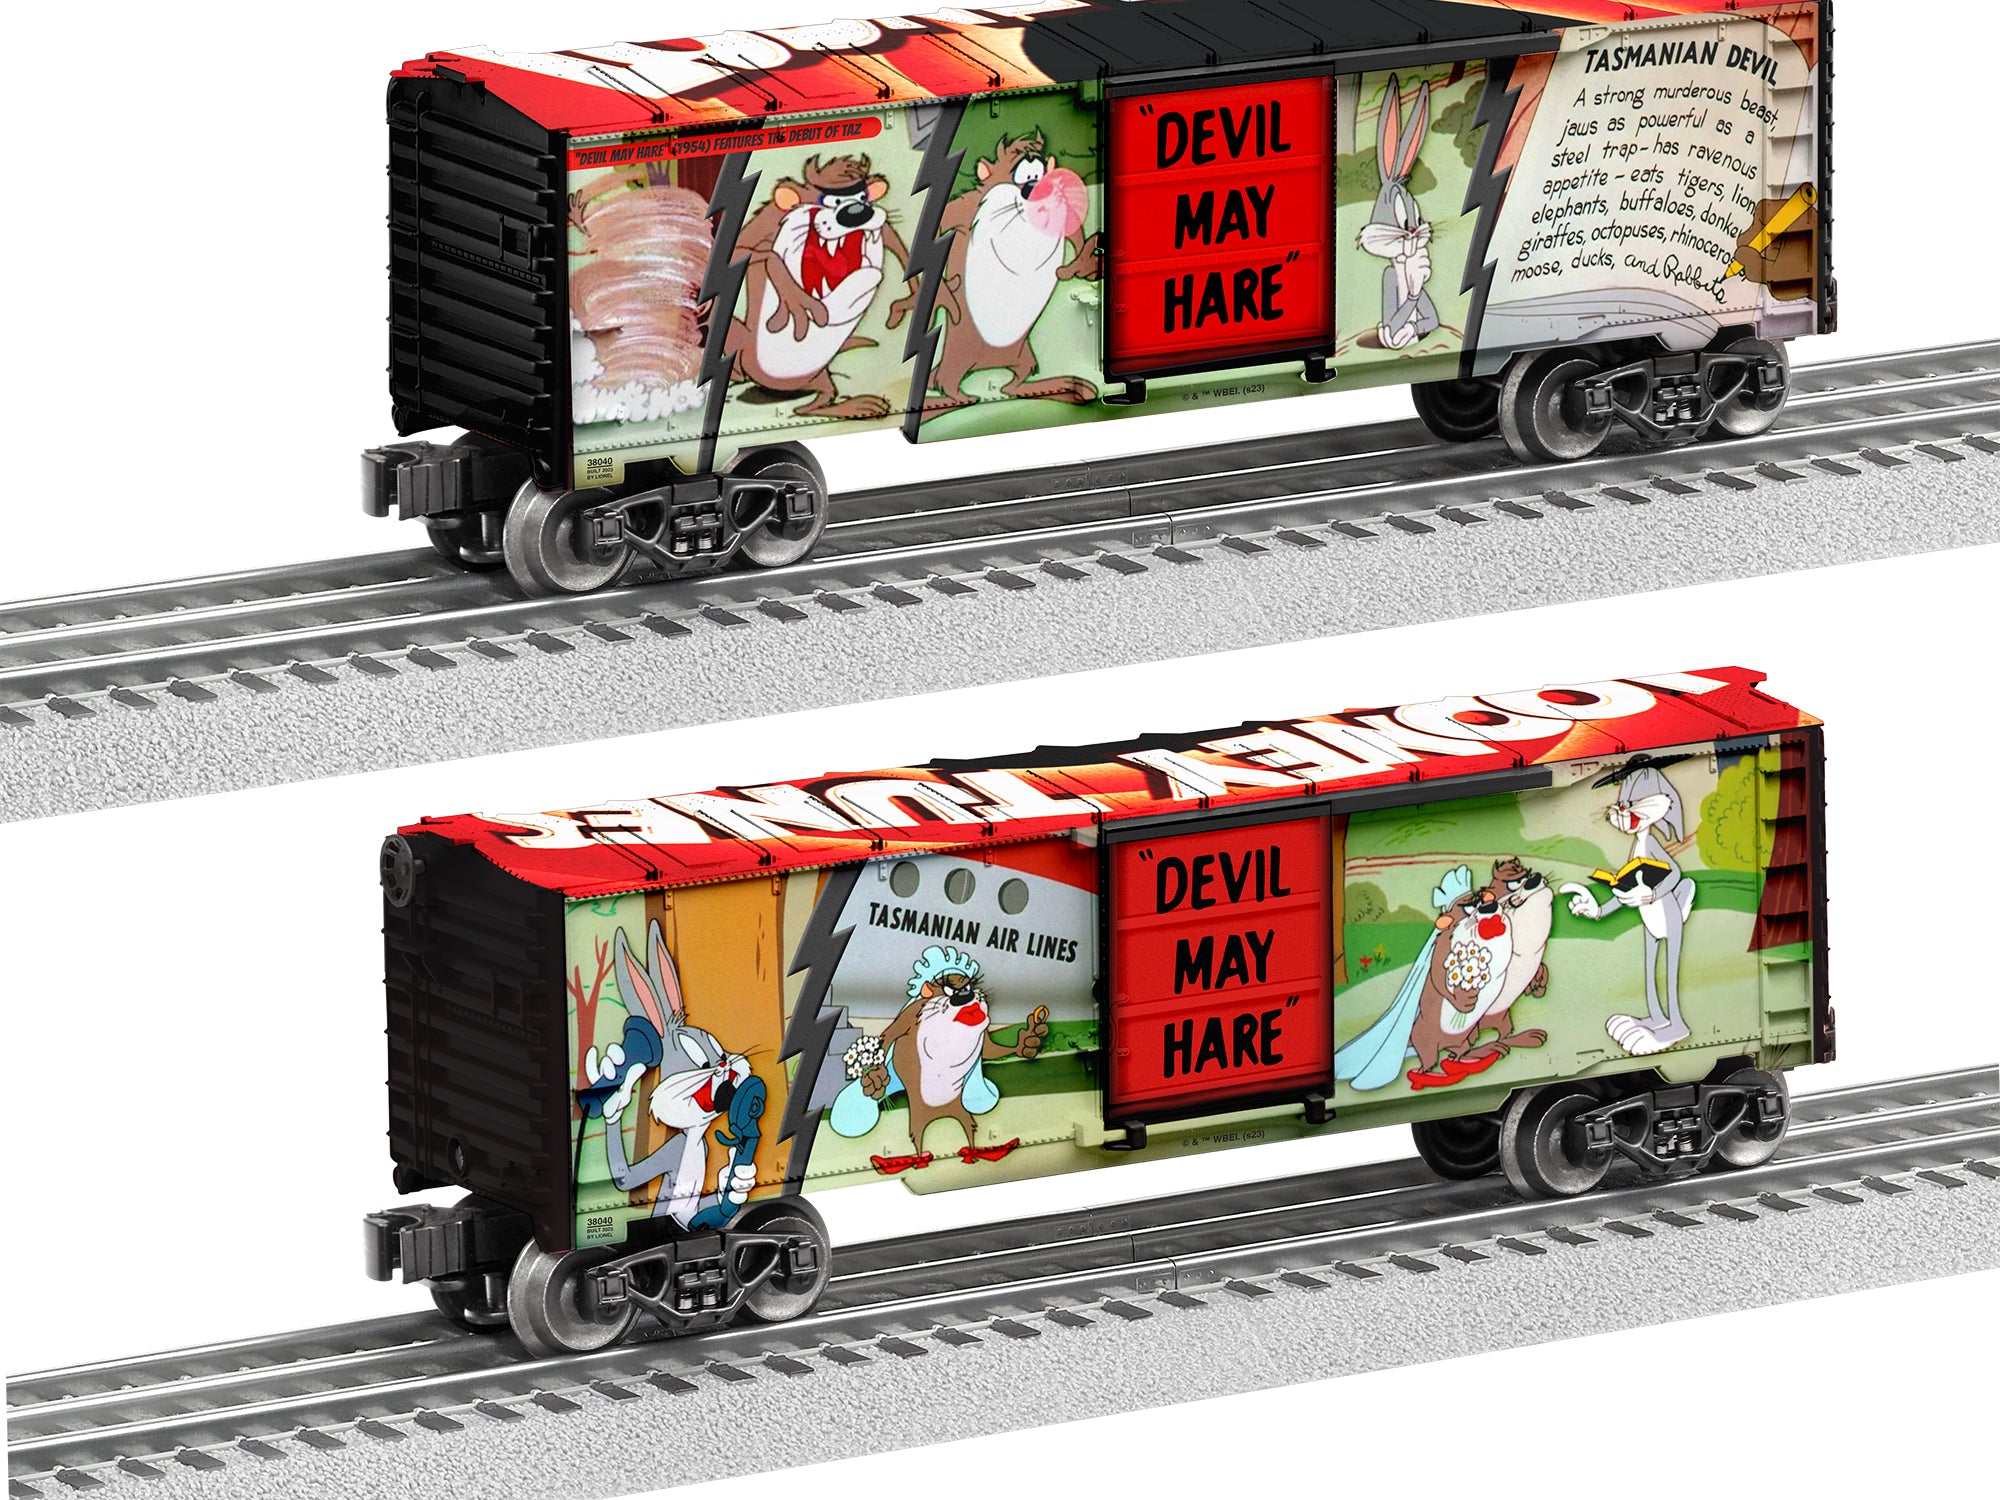 Lionel 2438040 - Looney Tunes - Boxcar "Devil May Hare" #2